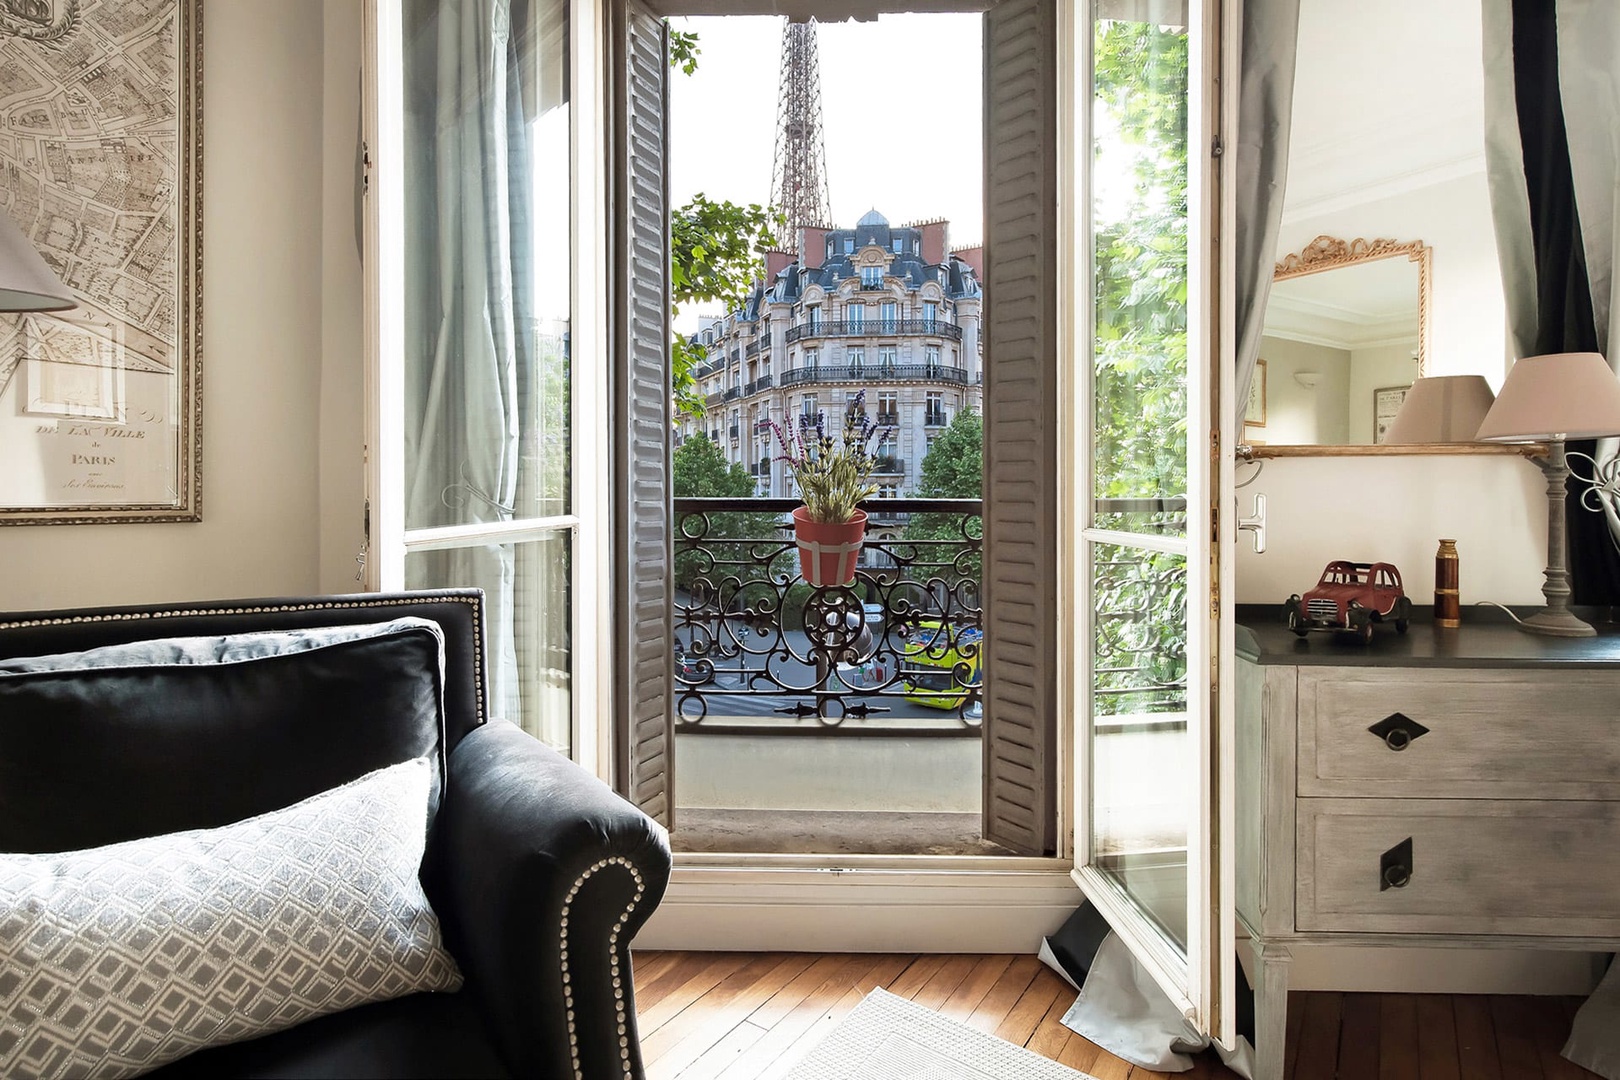 Soak in the Parisian atmosphere in the charming 7th arrondissement.